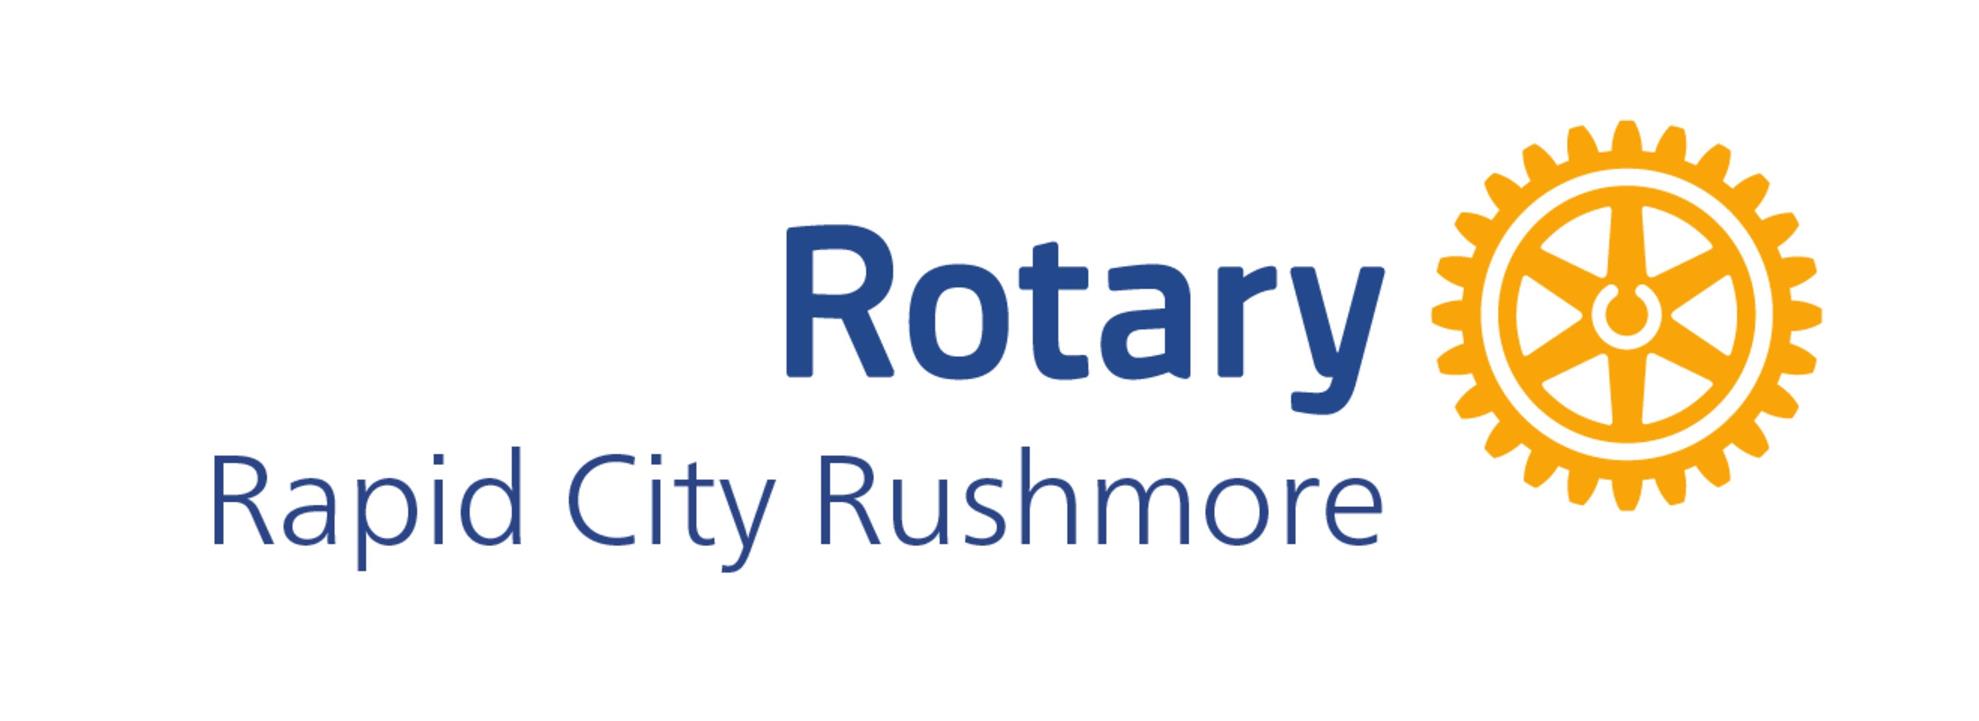 Limited-Time Offer!  Rotary Club of Hampton